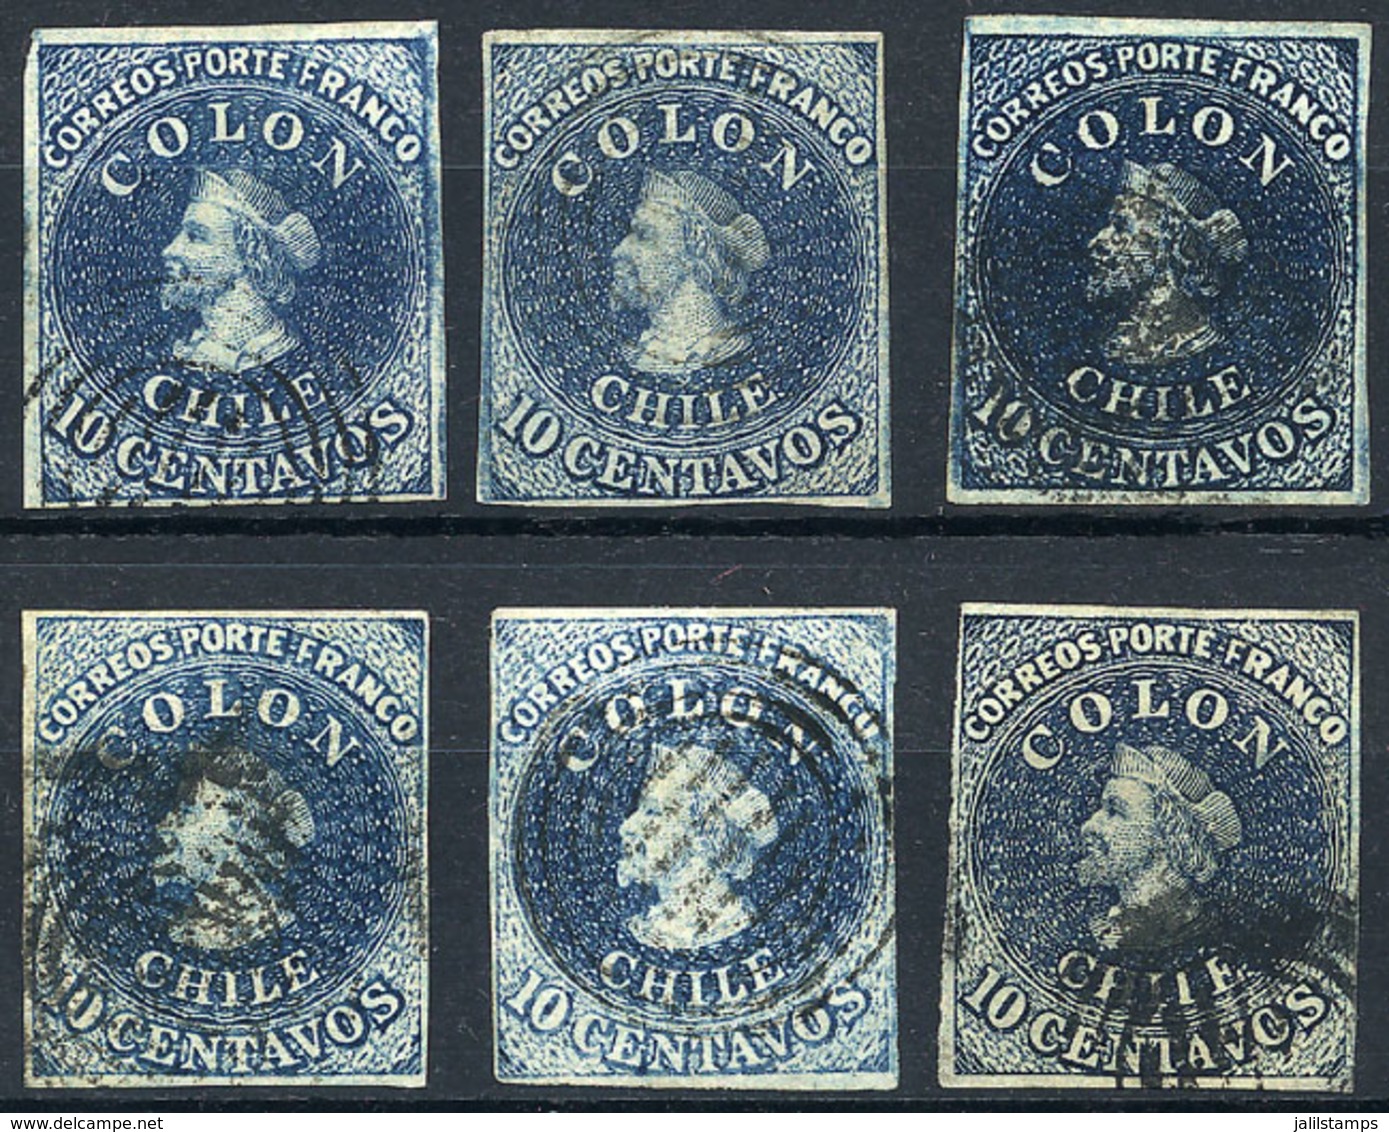 1018 CHILE: Yvert 6 (Sc.10) And Its Color Varieties, 1856/66 10c. Santiago Print (Estancos), 6 Examples Of 4 Margins, Ra - Chile